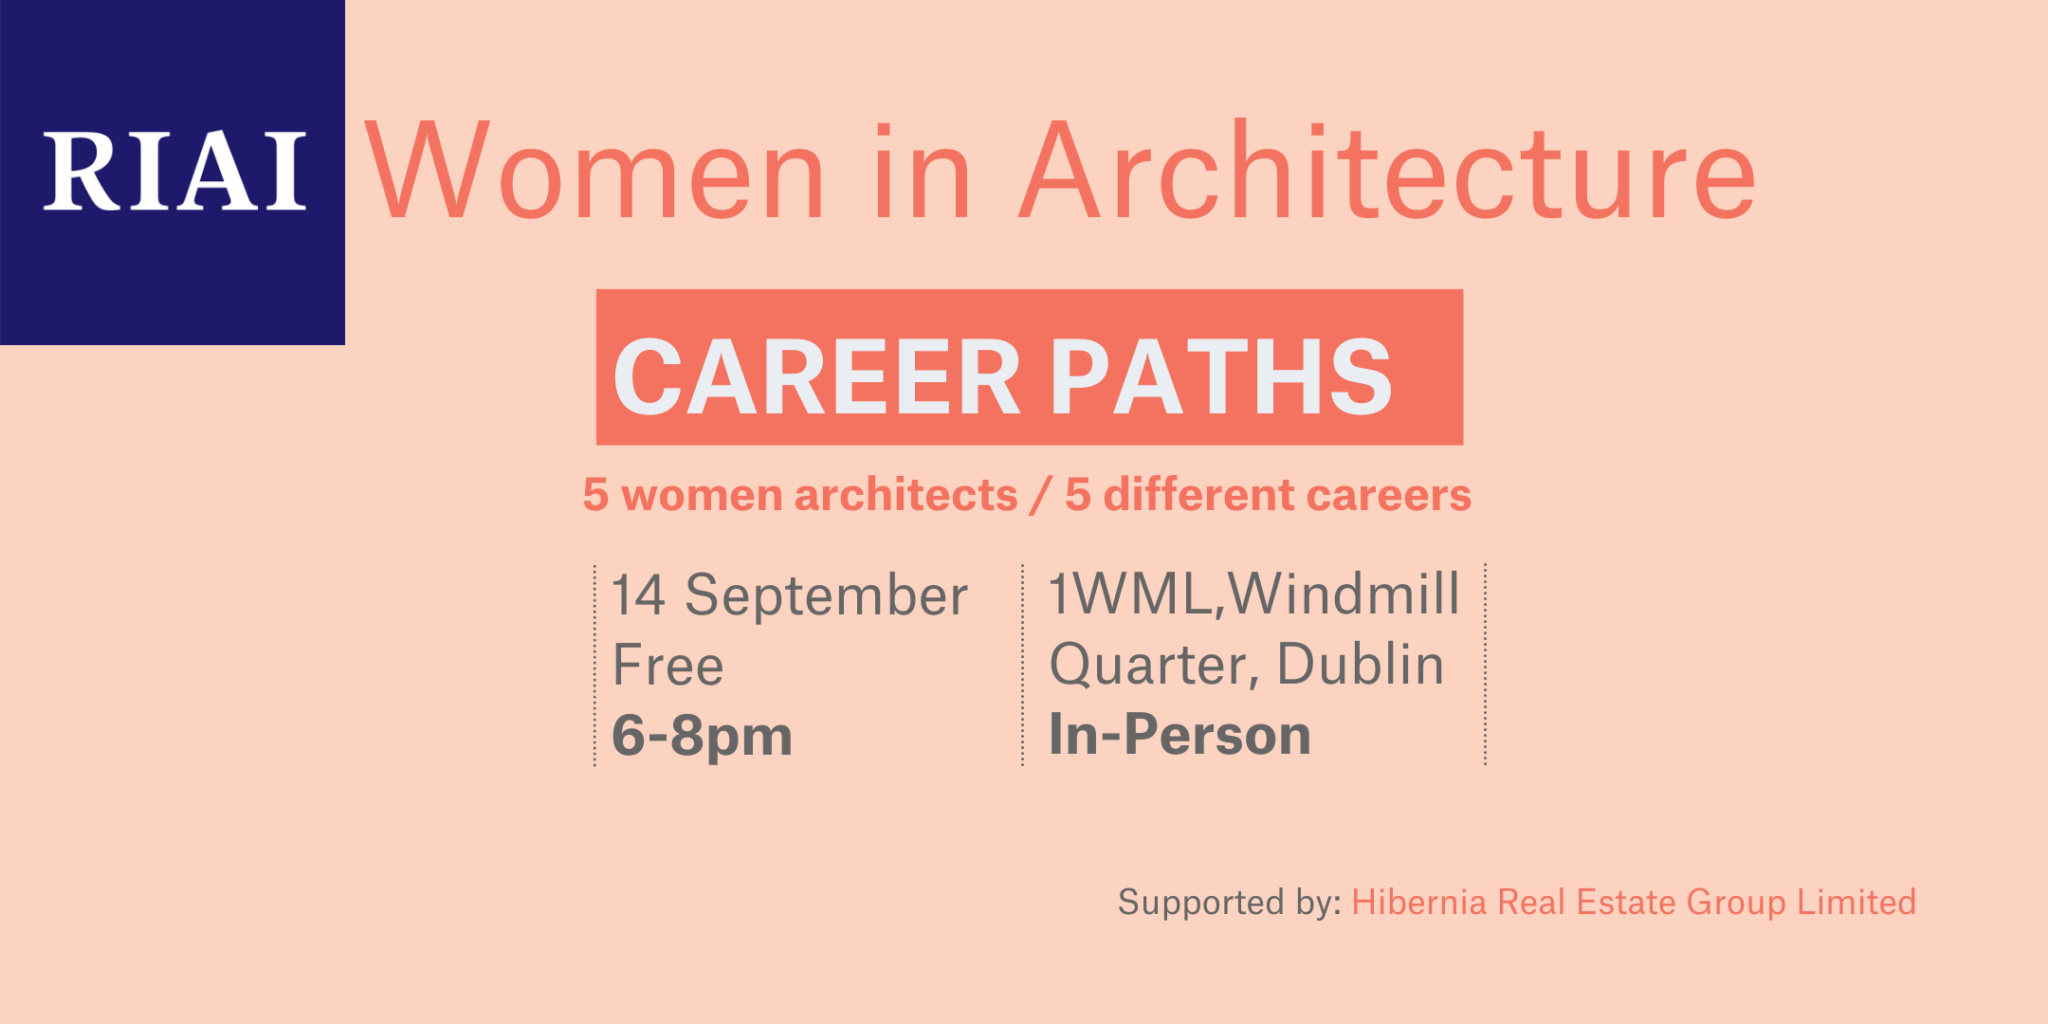 RIAI Women in Architecture: Career Paths ‘5 Women Architects / 5 Different Careers’